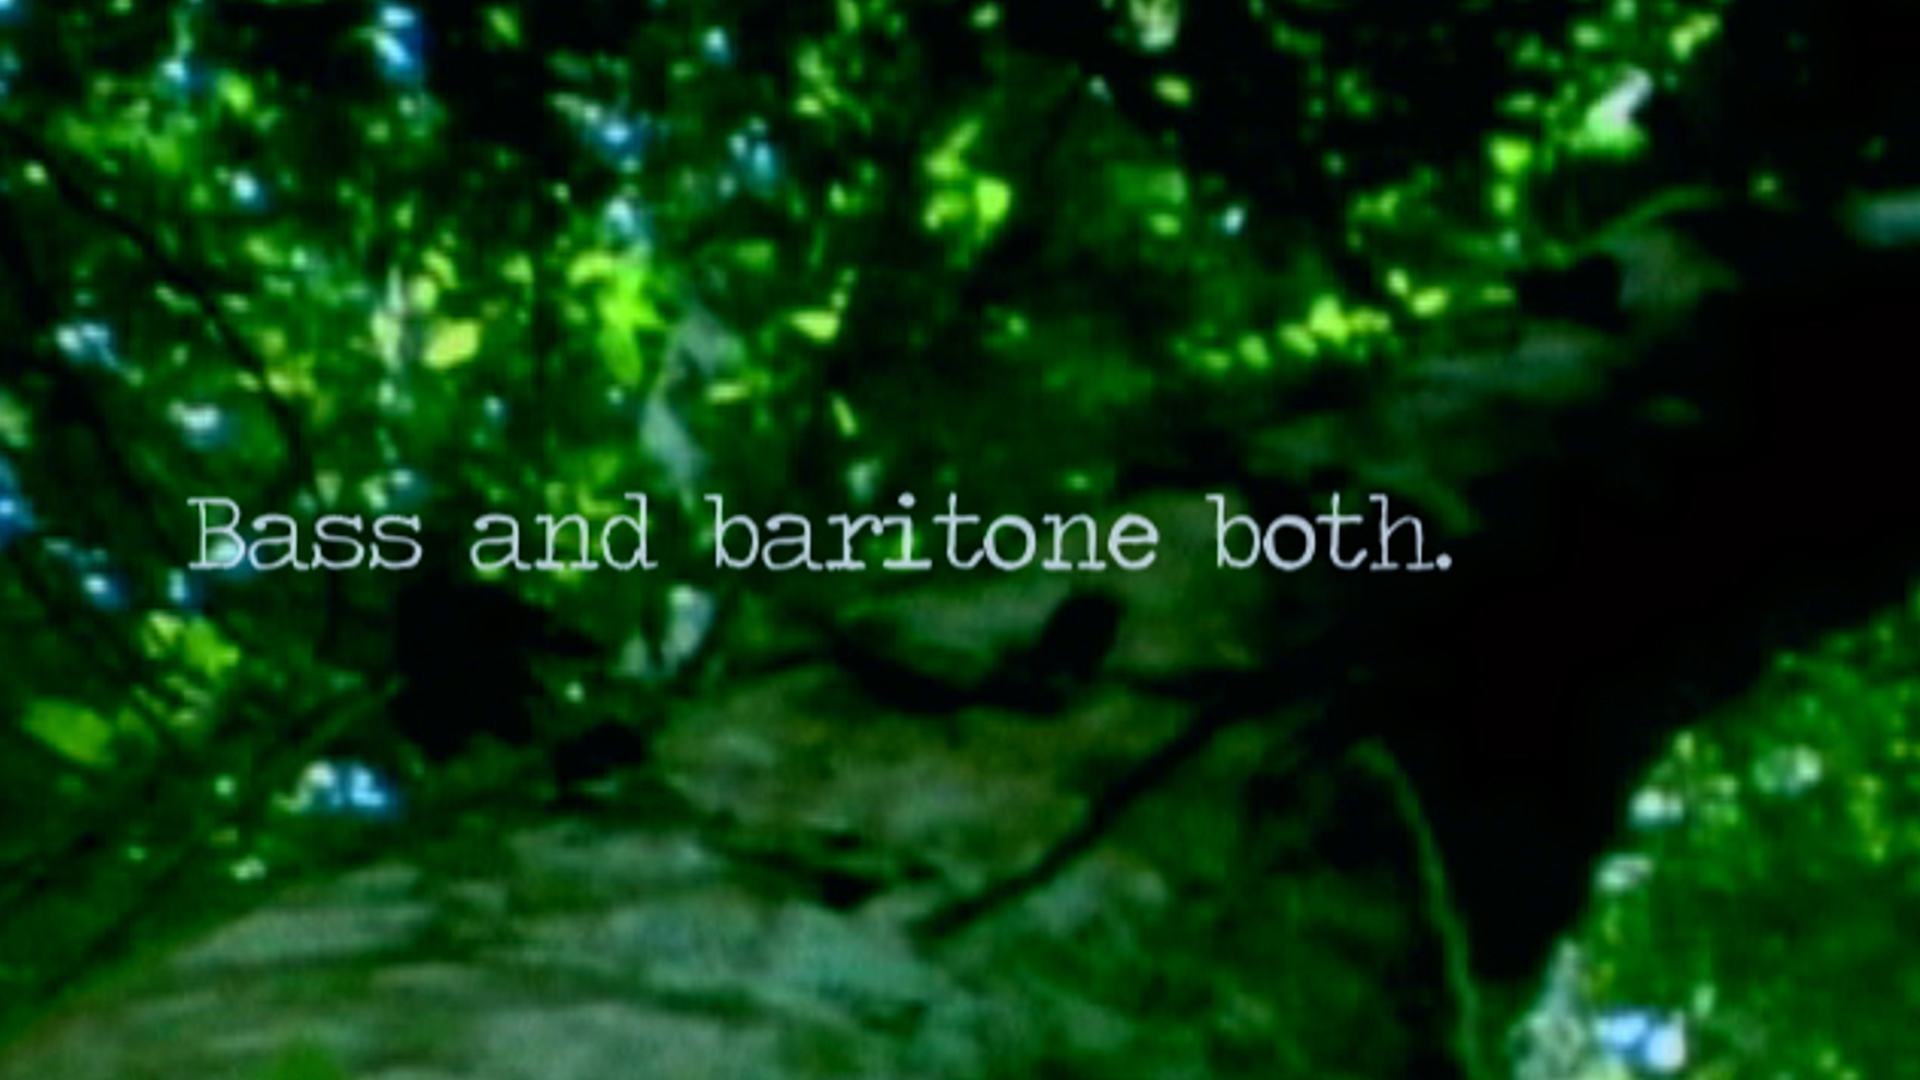 Bass and Baritone; The journal writ large